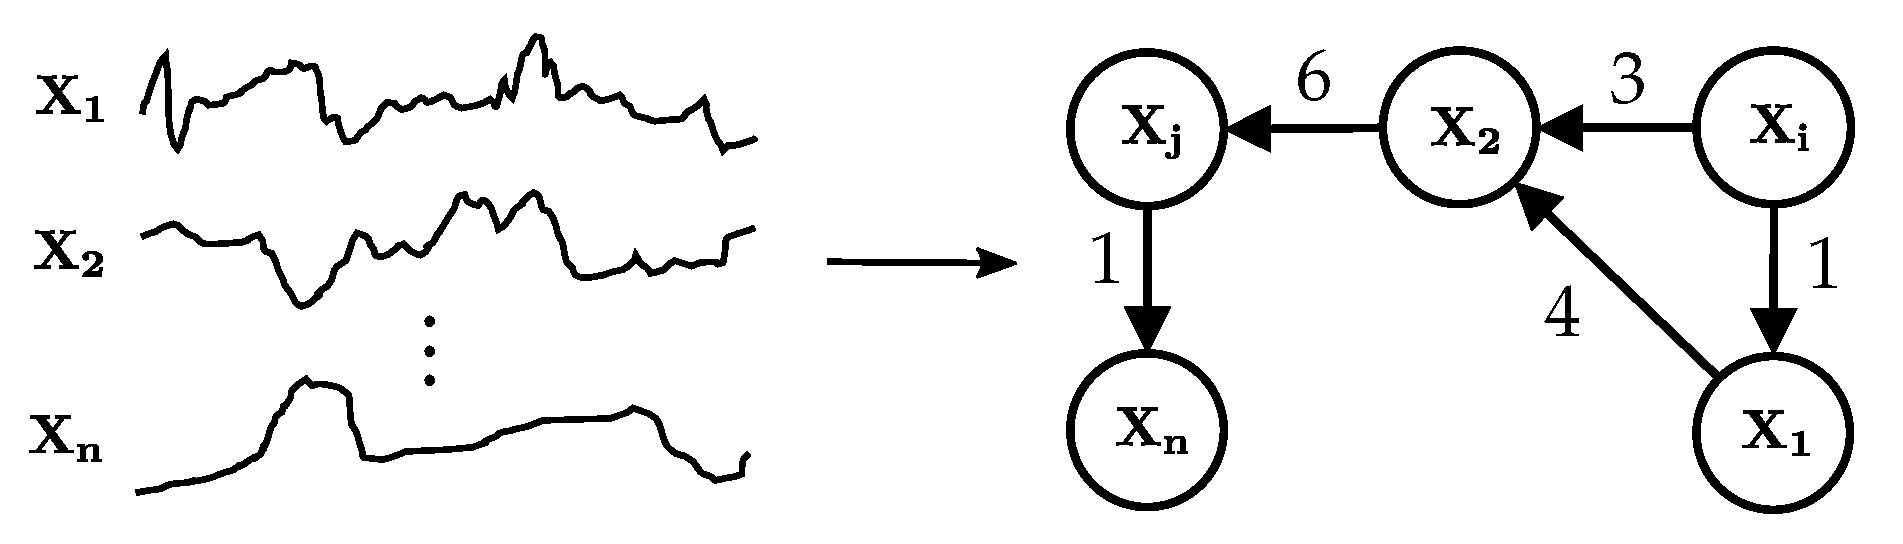 Multivariate time series as input, causal graph as output